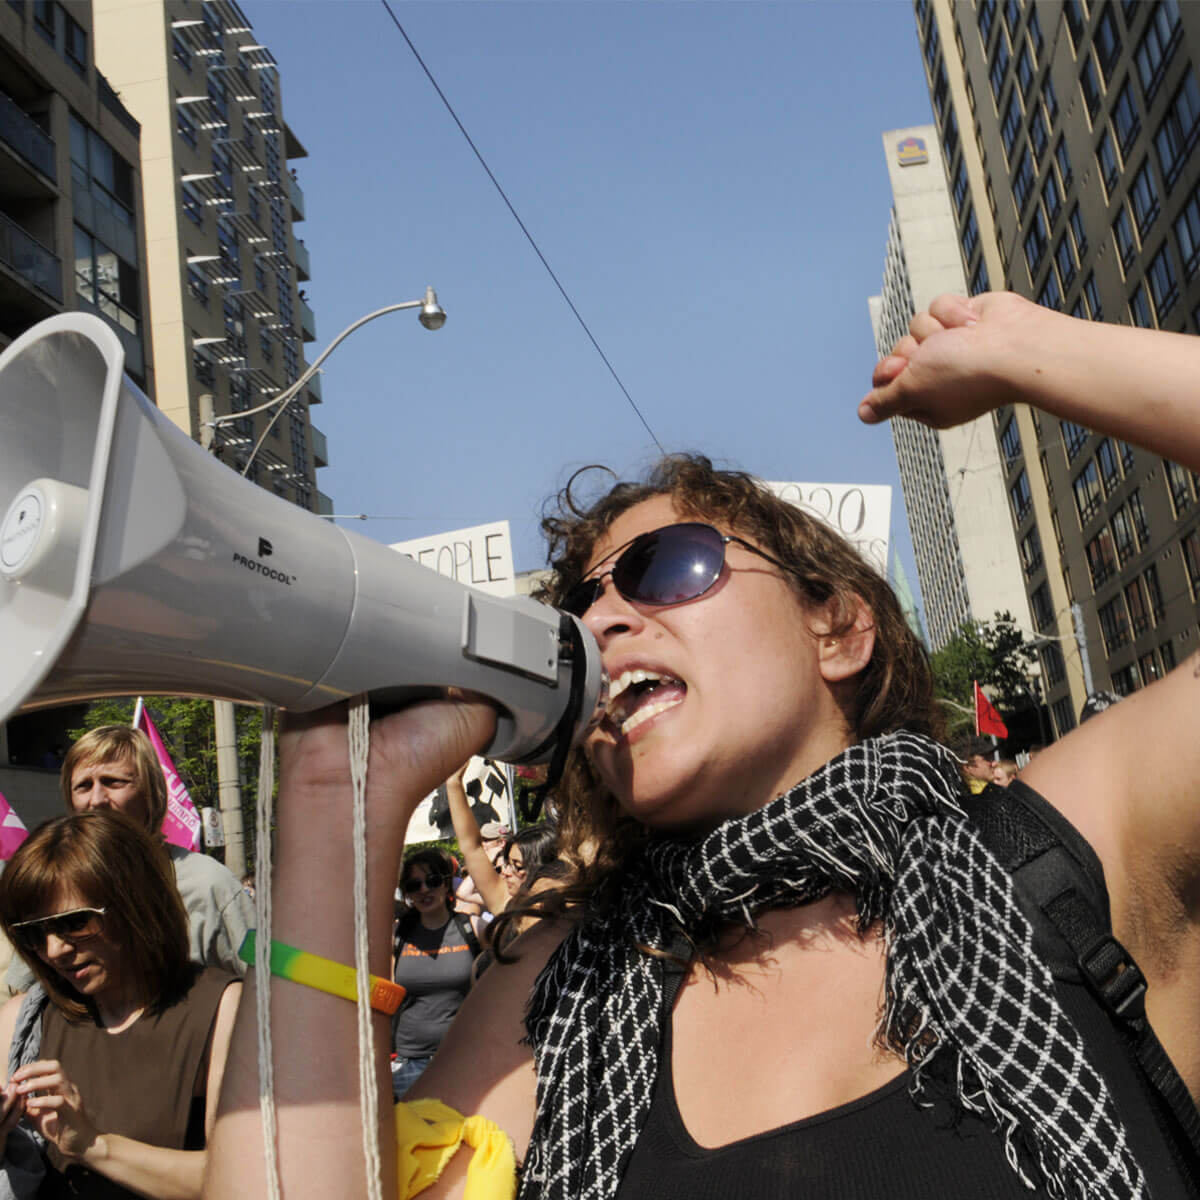 A woman speaking in a megaphone with her fist raised